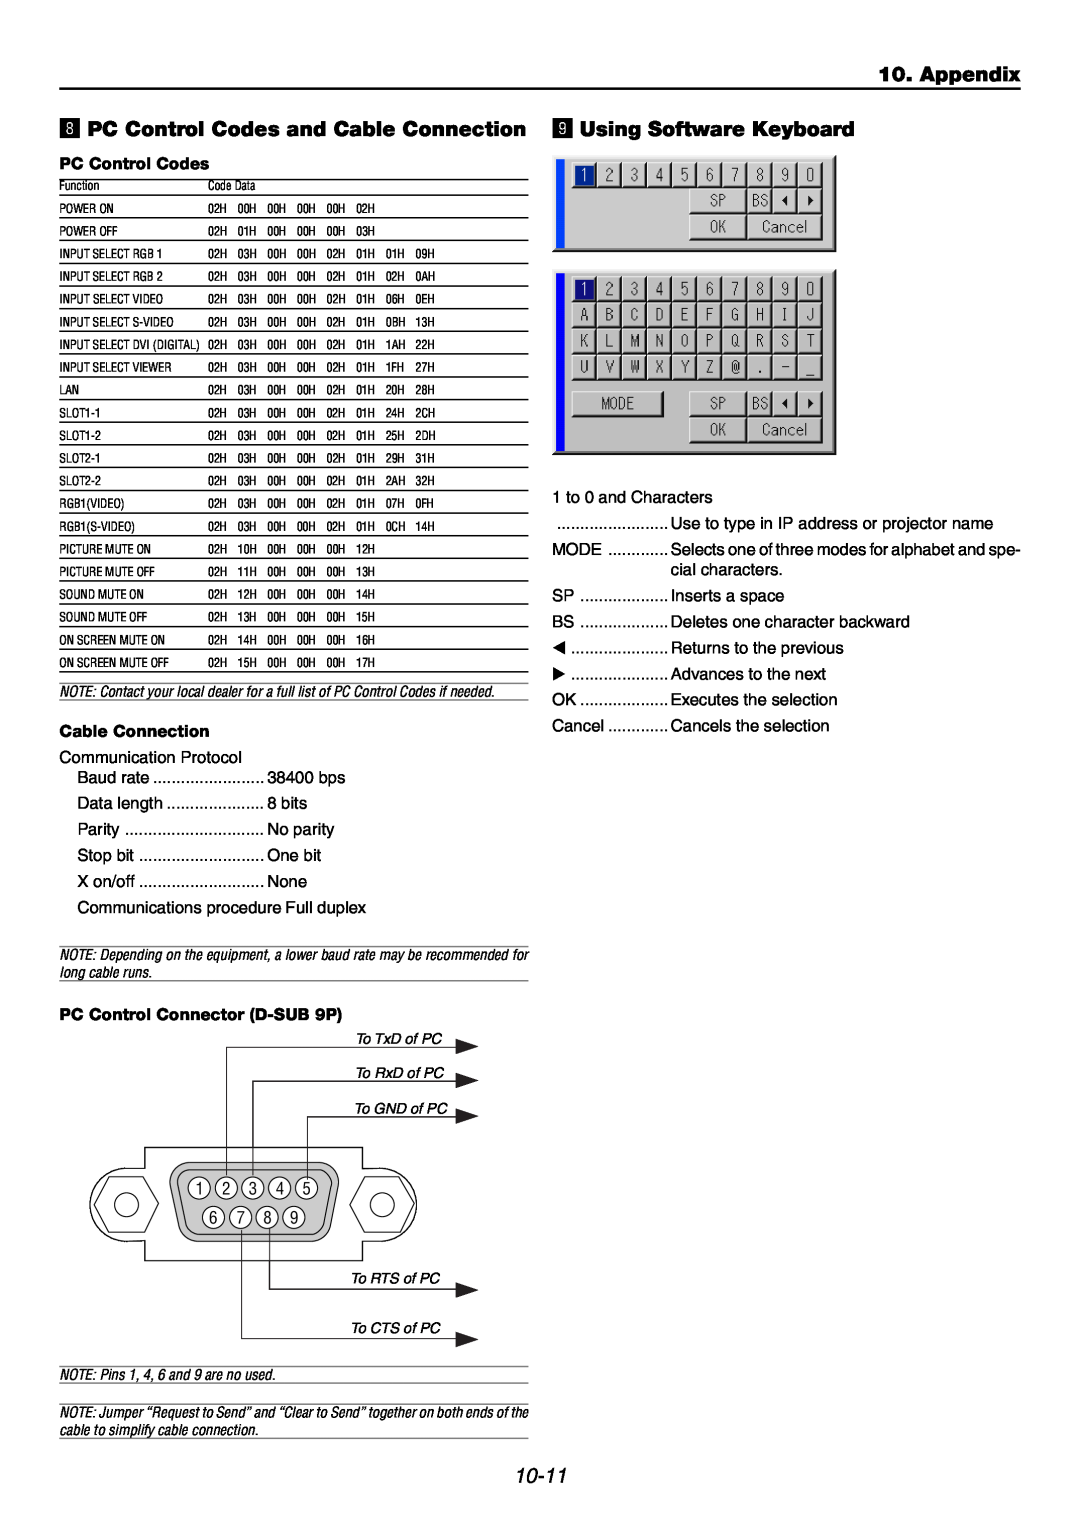 NEC GT6000 Appendix, PC Control Codes and Cable Connection, Using Software Keyboard, 10-11, PC Control Connector D-SUB9P 